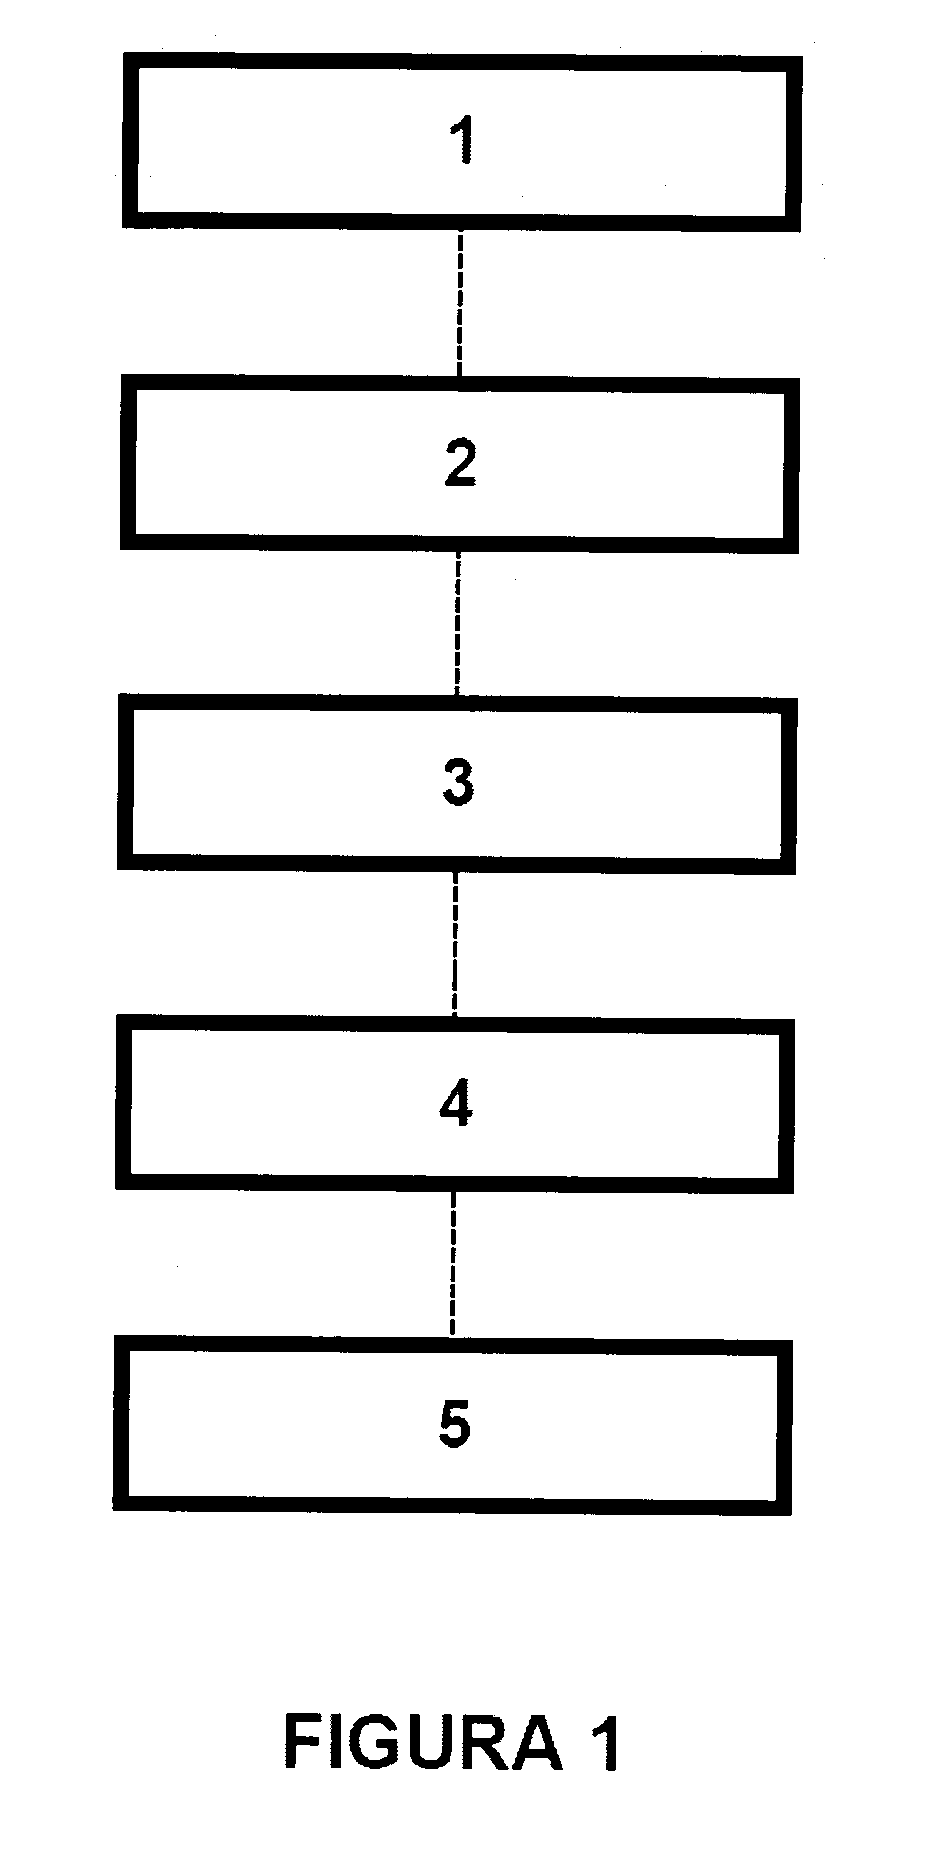 Parts with different surface finishes and the procedure to obtain them